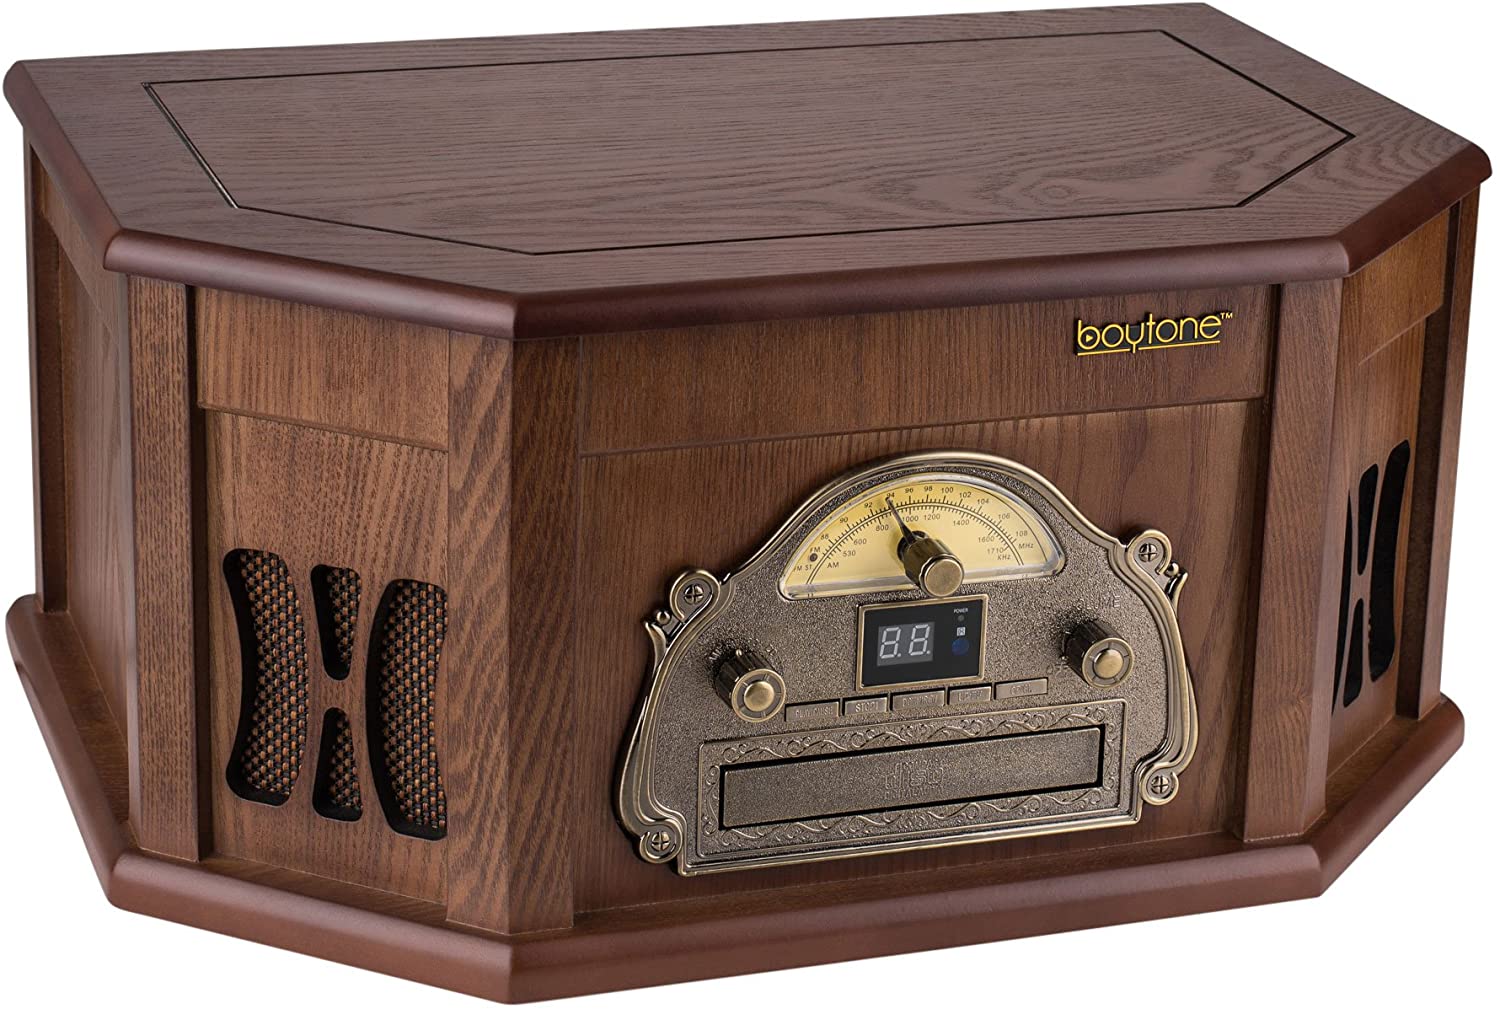 Boytone BT-25MB 8-in-1 Natural Wood Classic Turntable Stereo System with Bluetooth Connection, Vinyl Record Player, AM/FM, CD, Cassette, USB, SD Slot. 2 Built-in Speakers, Remote Control, MP3 Player - image 2 of 8